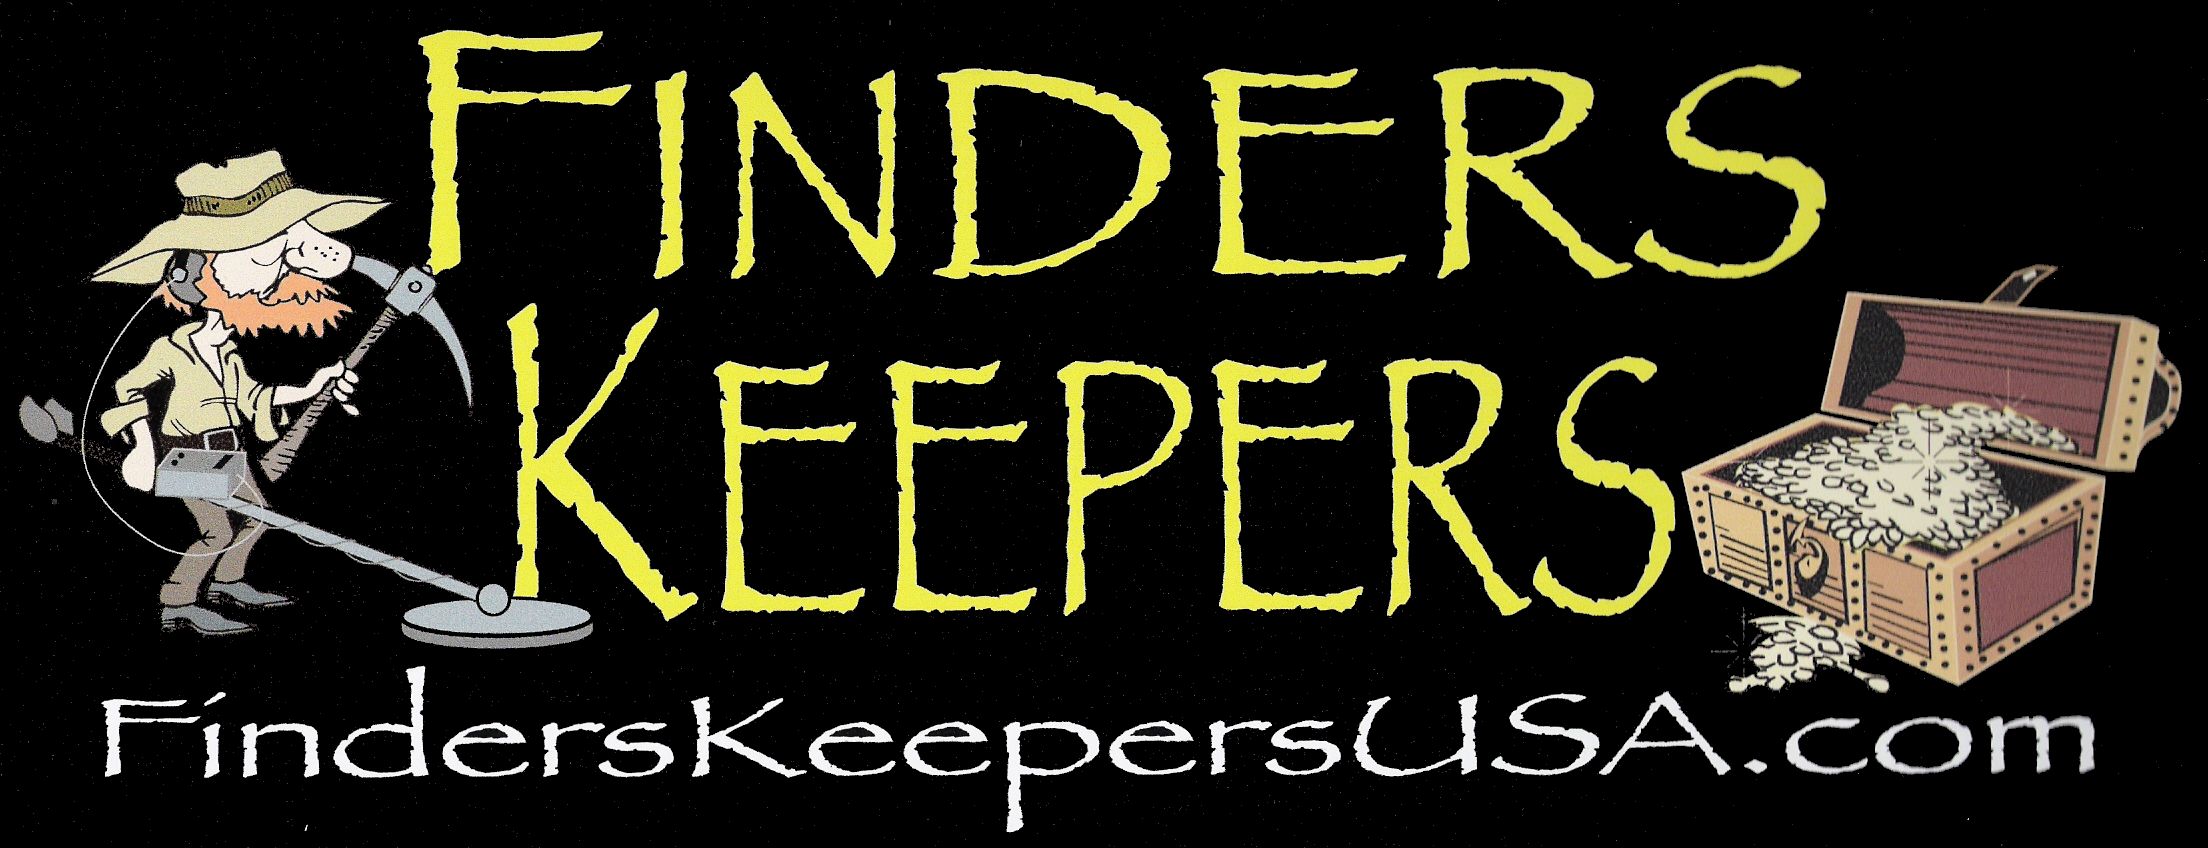 Finders Keepers USA logo